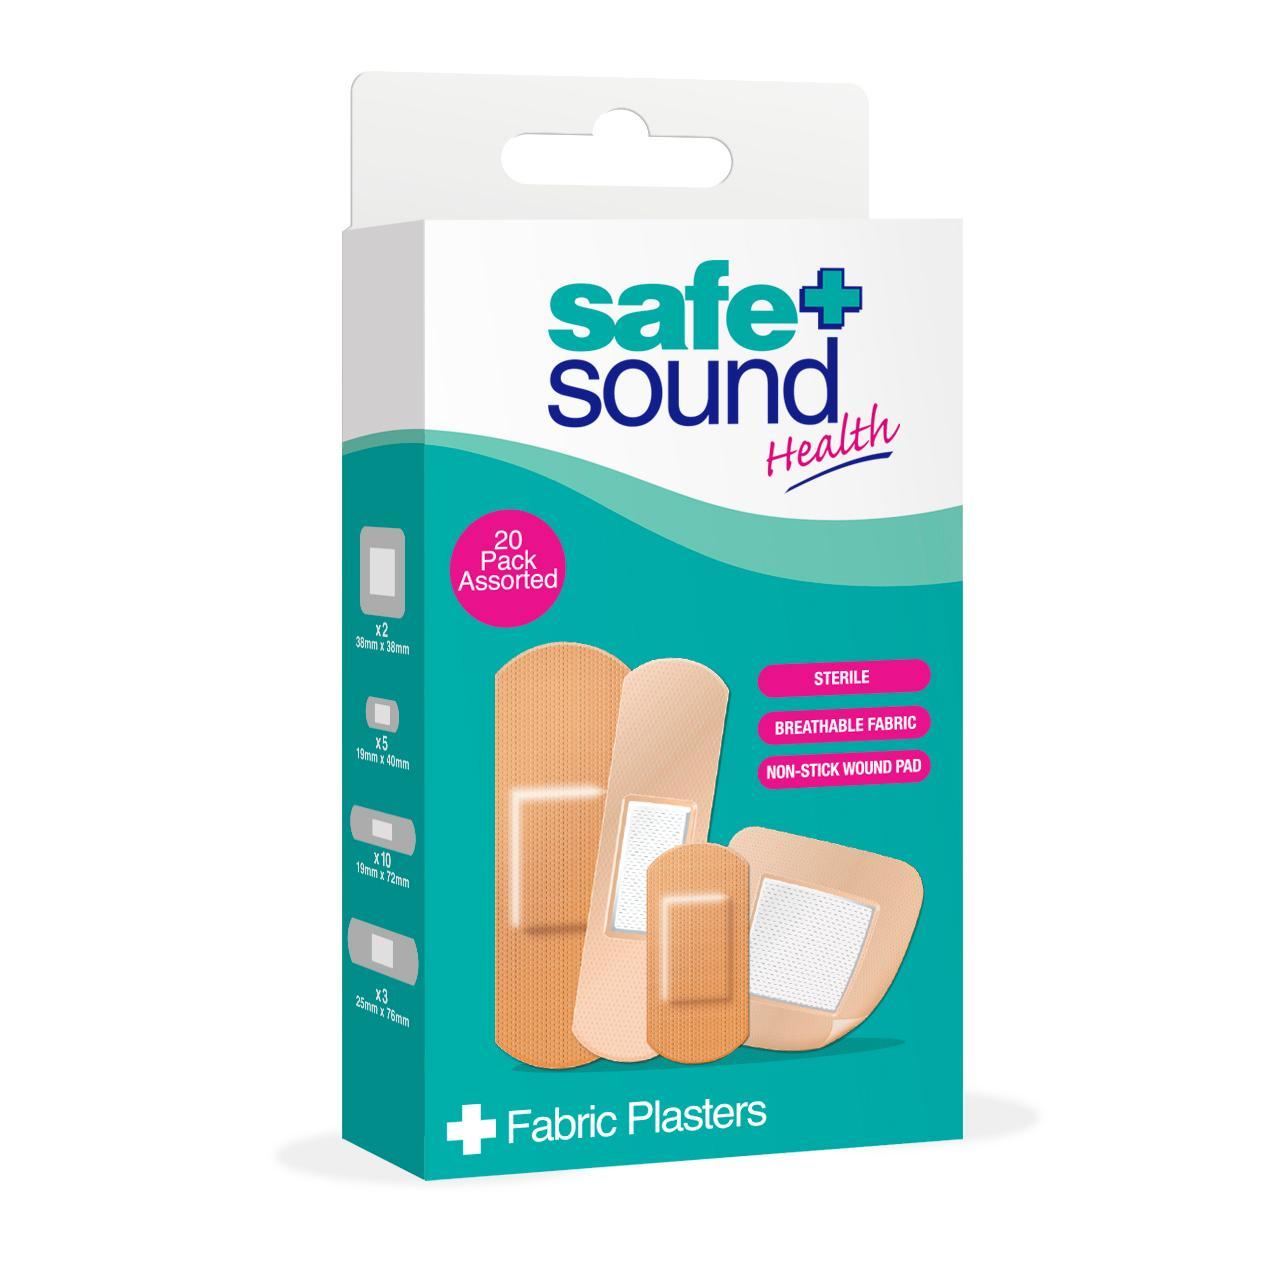 Safe & Sound Assorted Fabric Plasters 20 per pack